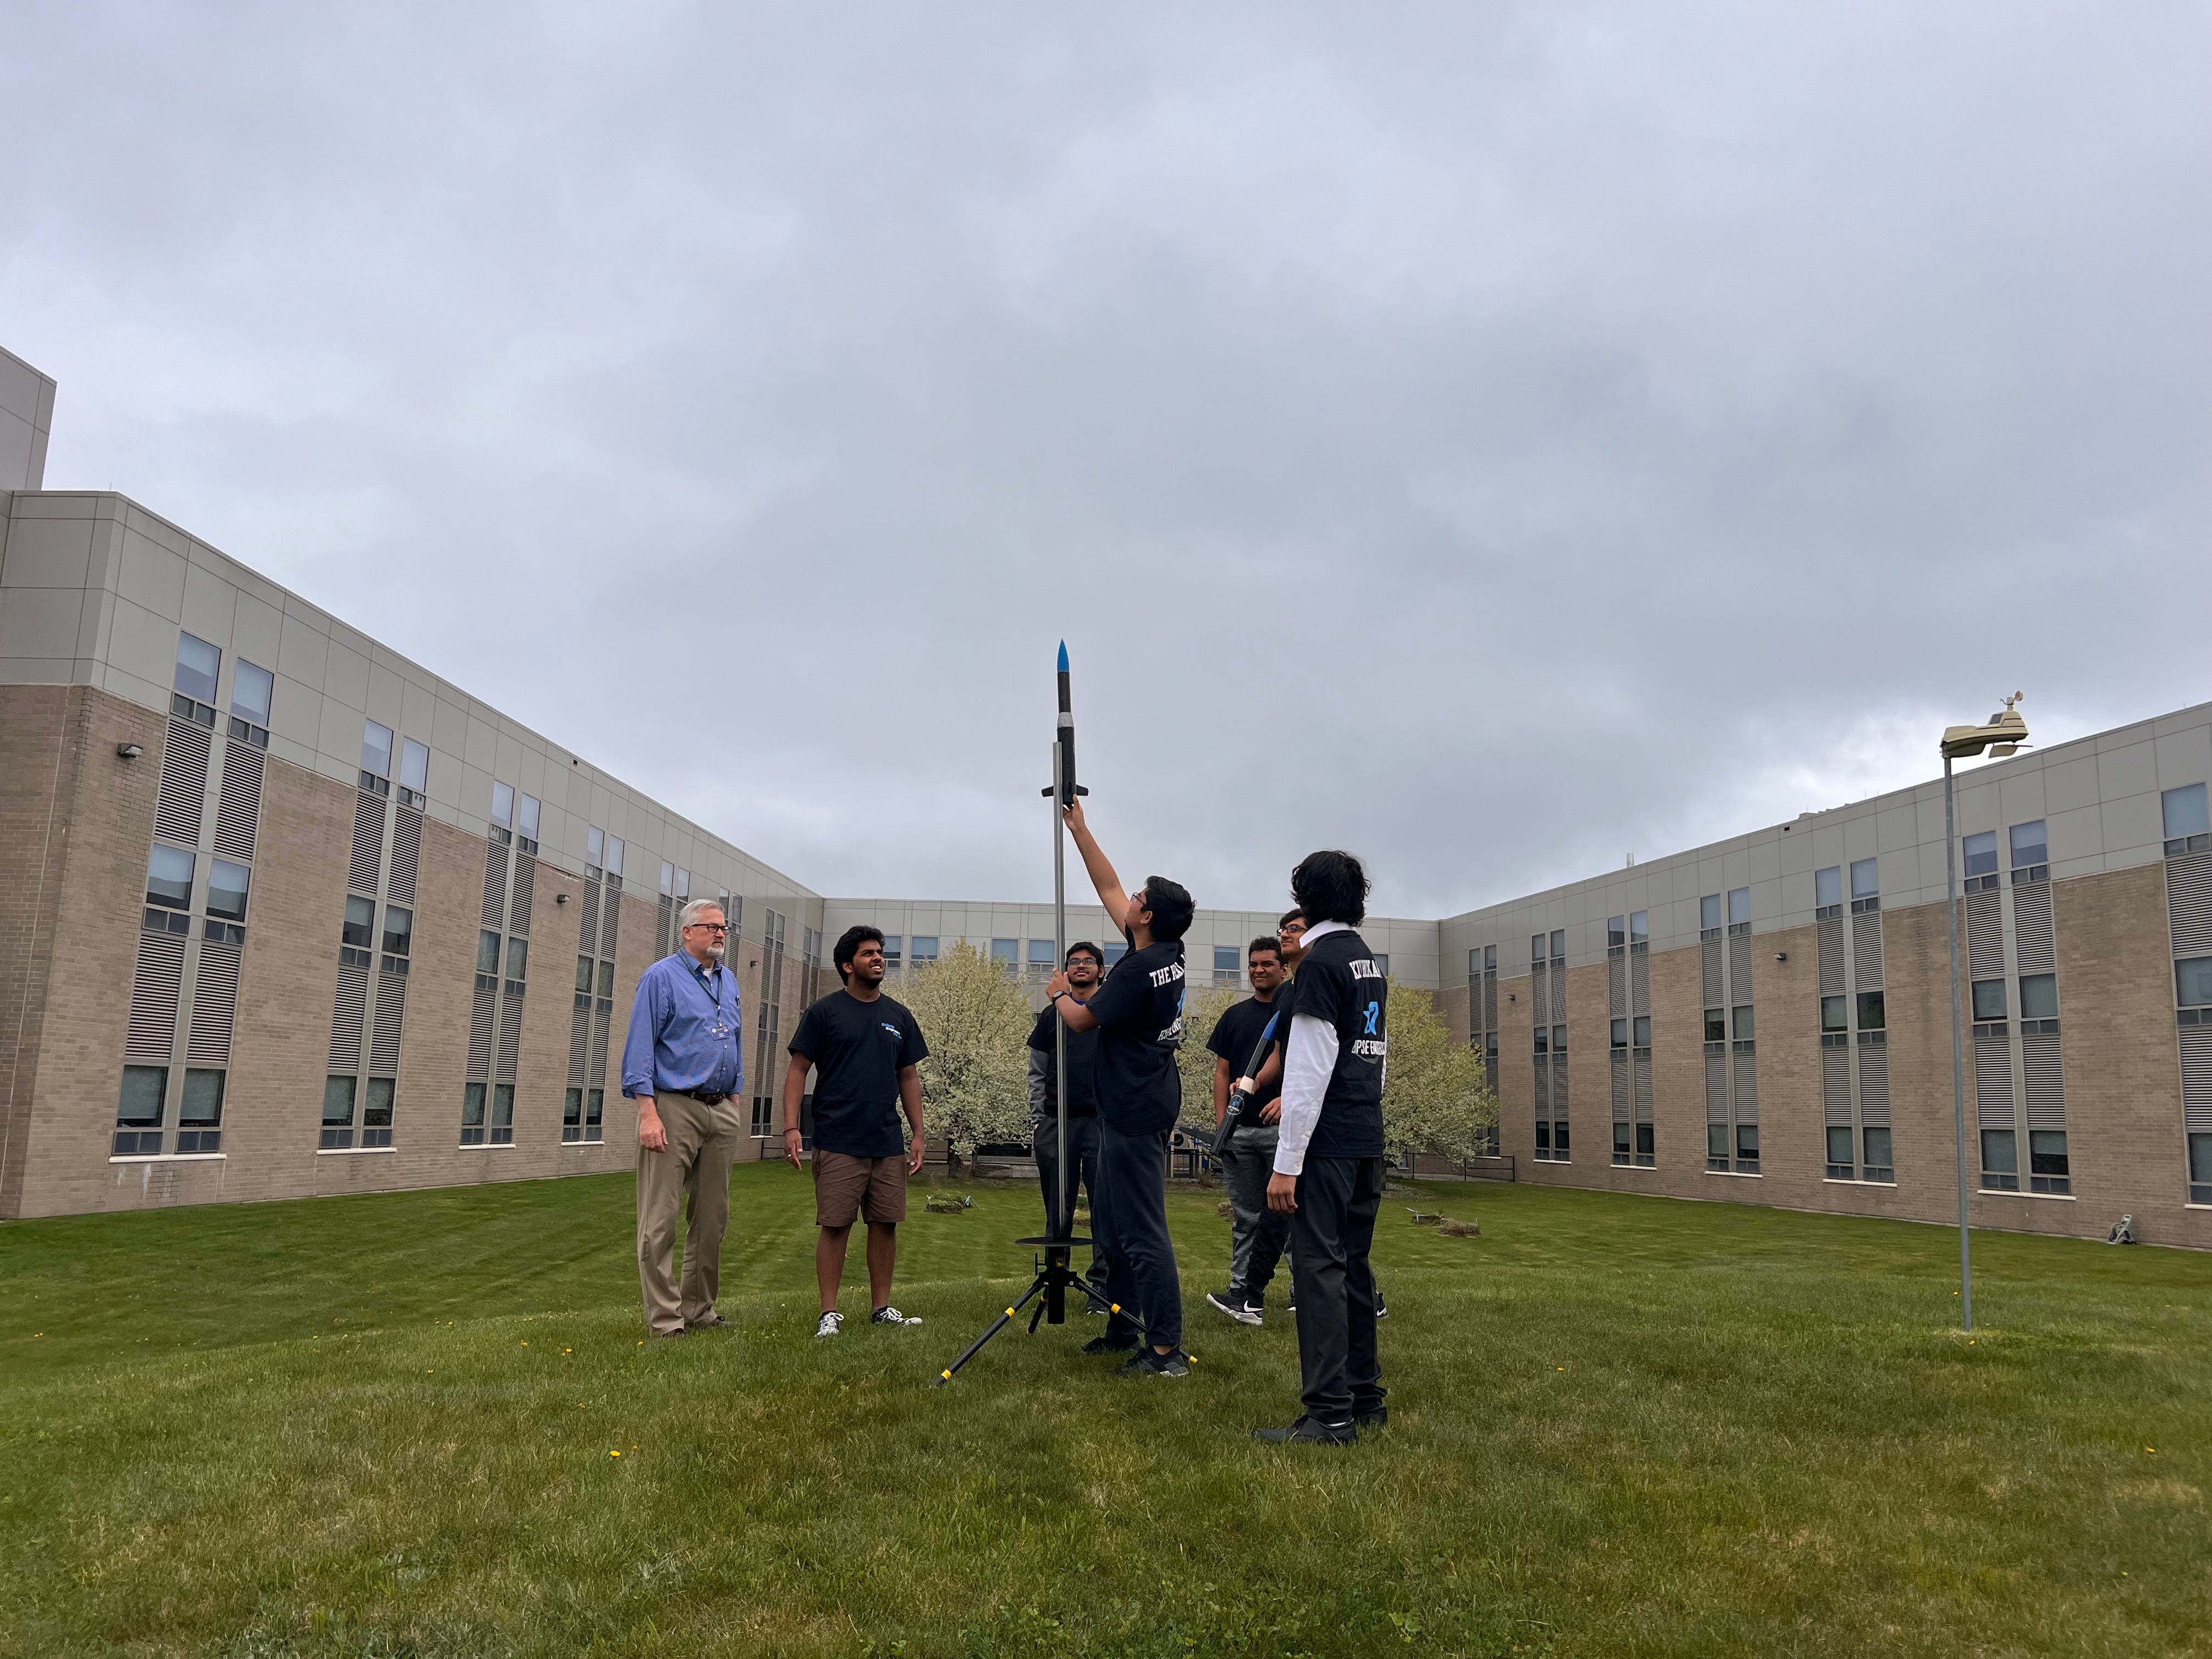 Shrewsbury High School students qualify for first time for national rocketry competition